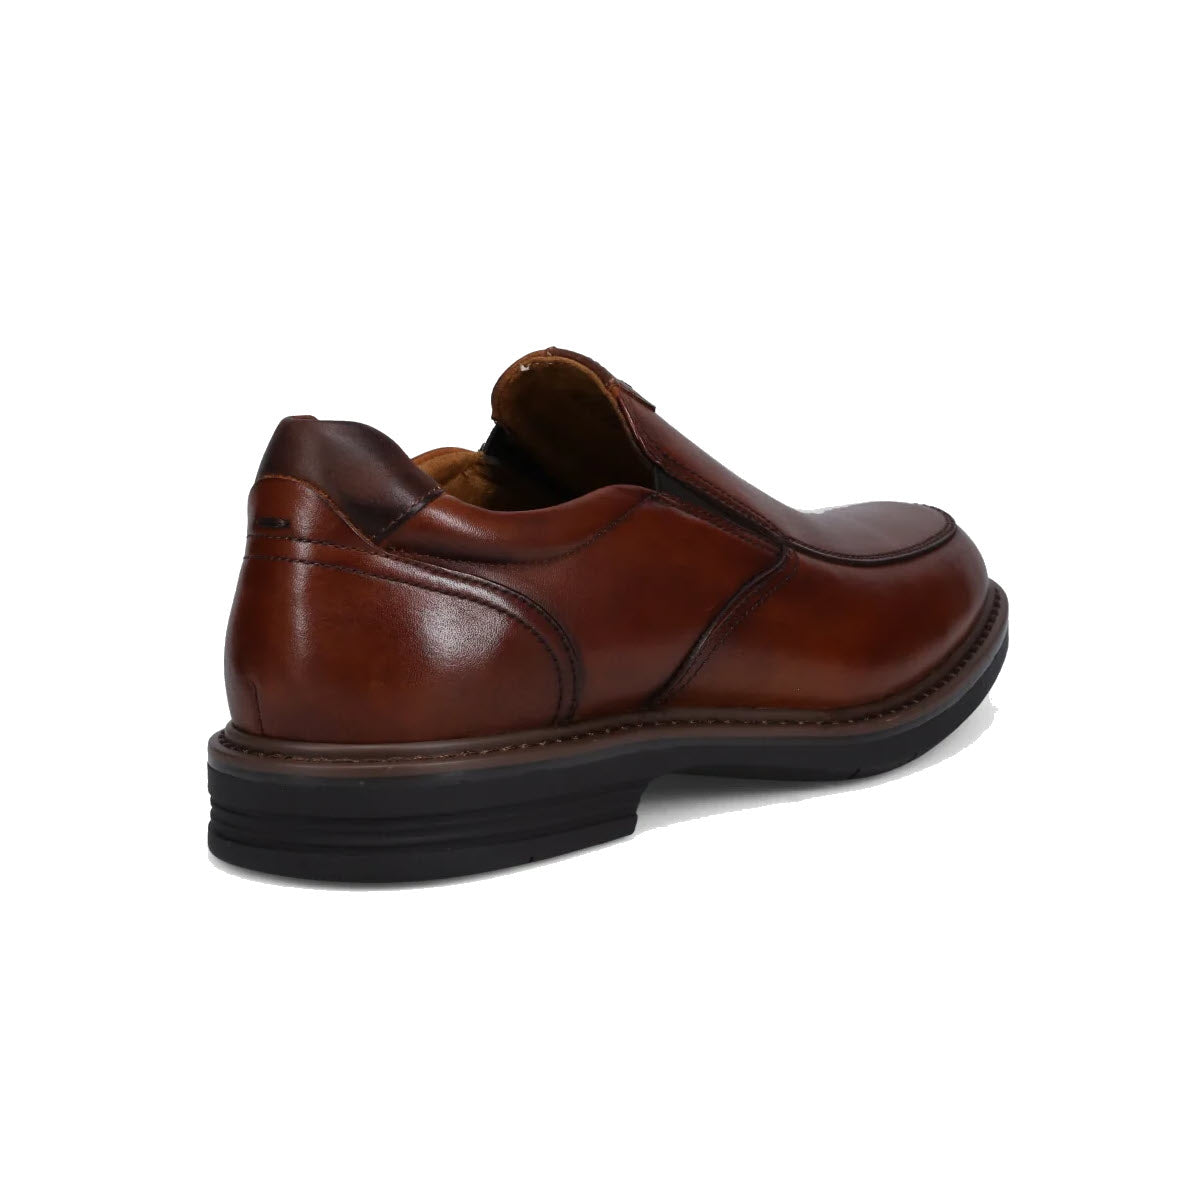 A single Florsheim Norwalk Moc Toe Slip On Cognac - Mens shoe with a black sole, displayed on a white background.